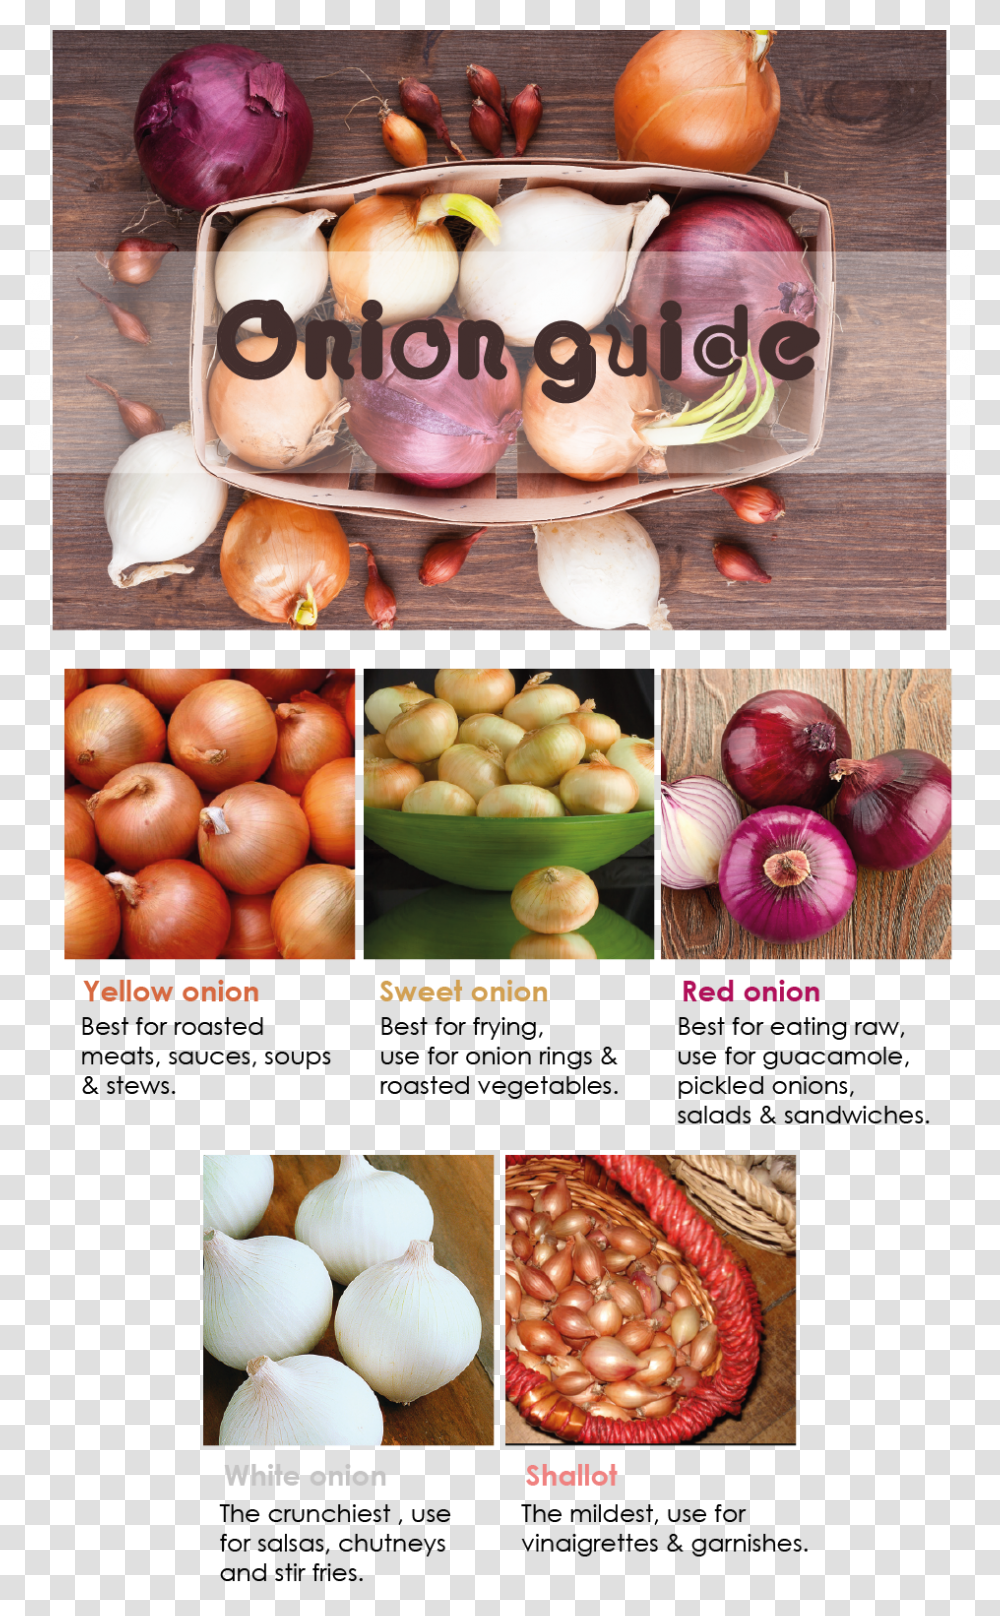 Onion Guide Onions, Plant, Vegetable, Food, Shallot Transparent Png